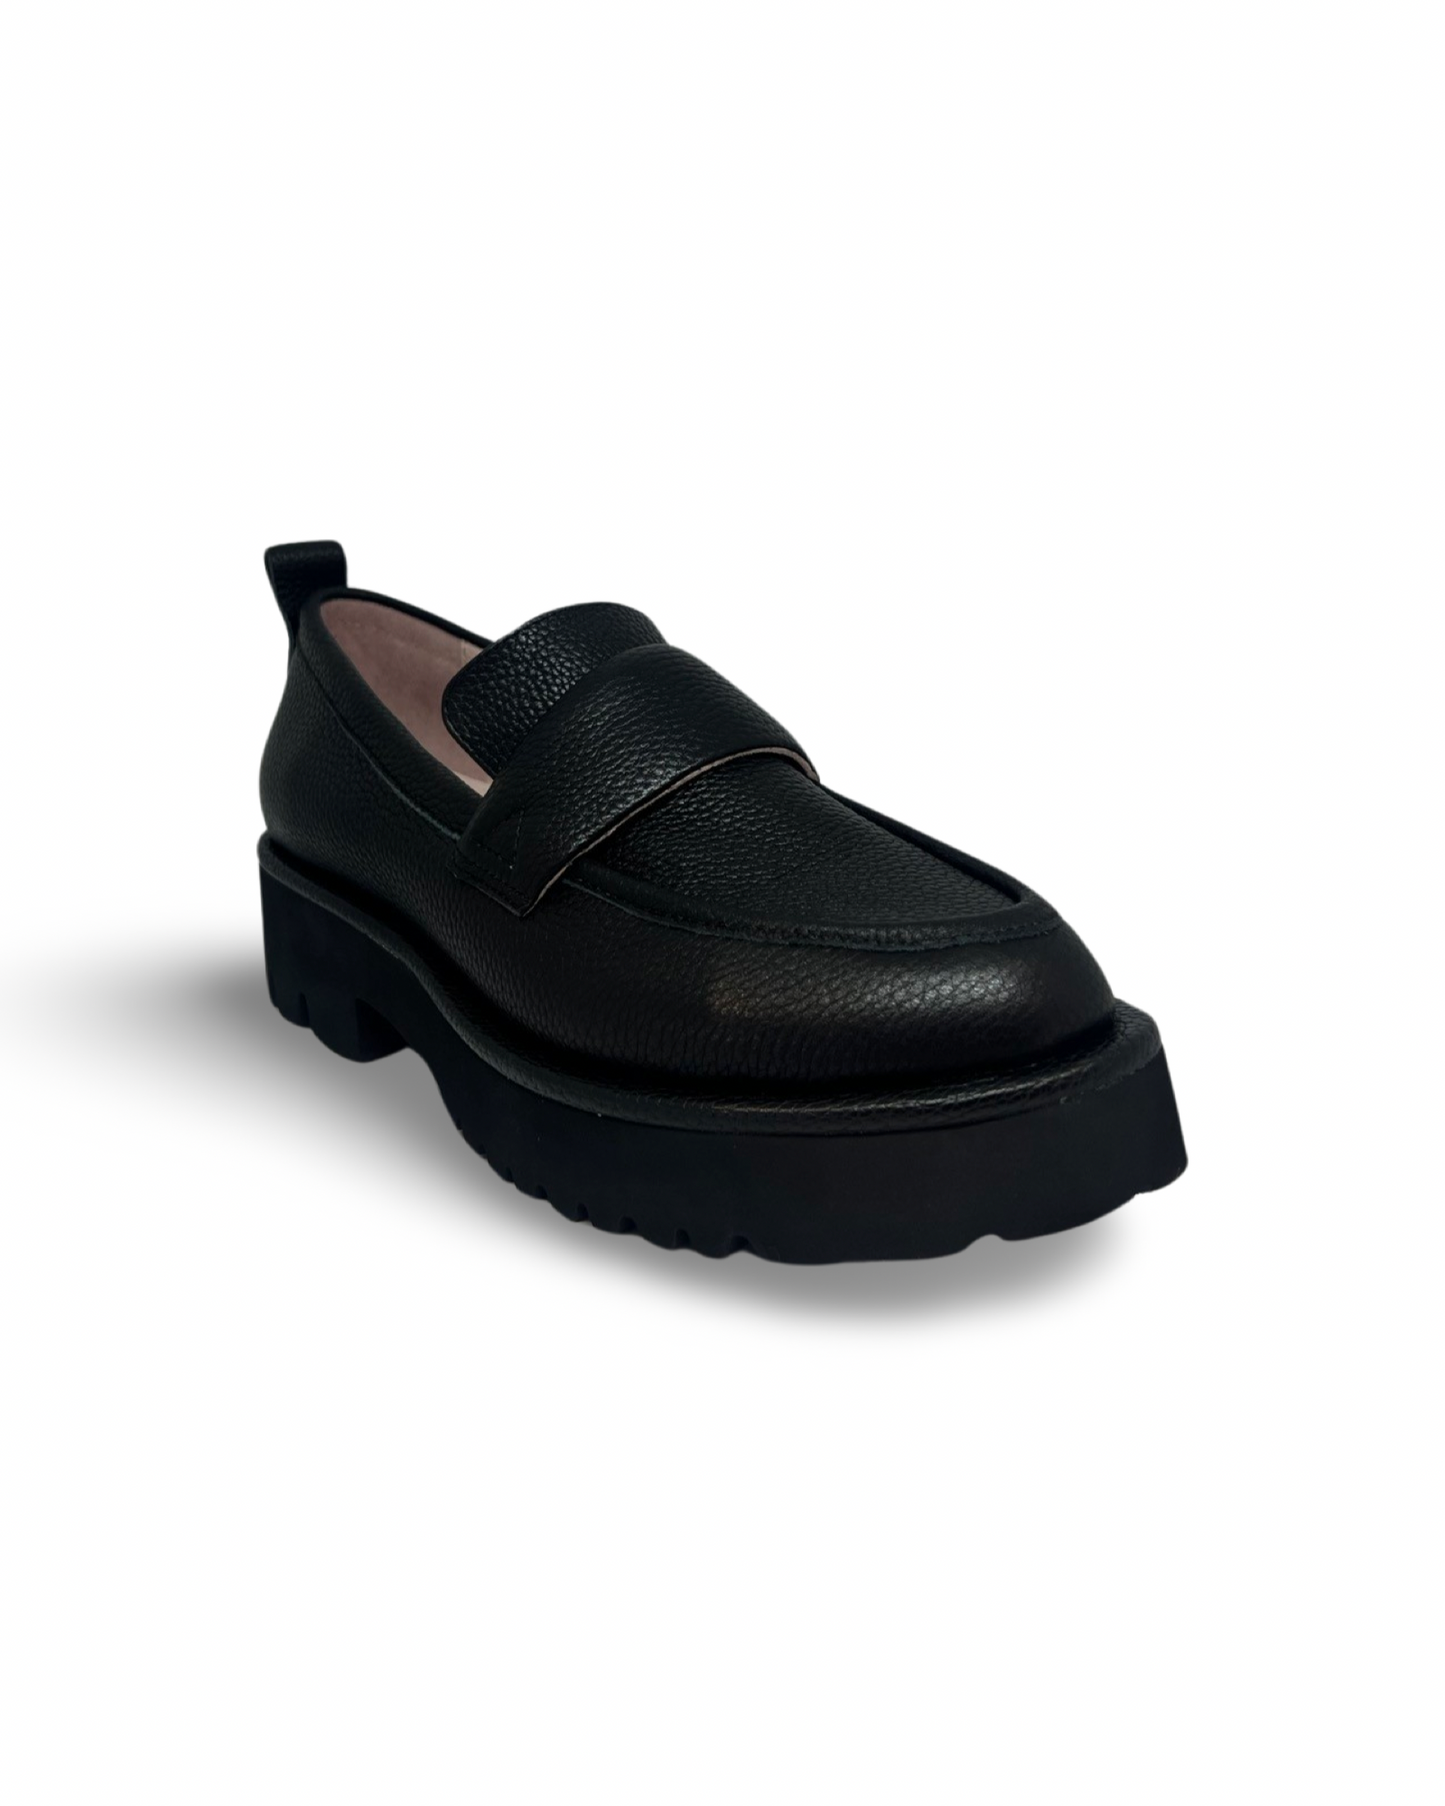 Hipster Loafer By Andrea Biani - Black